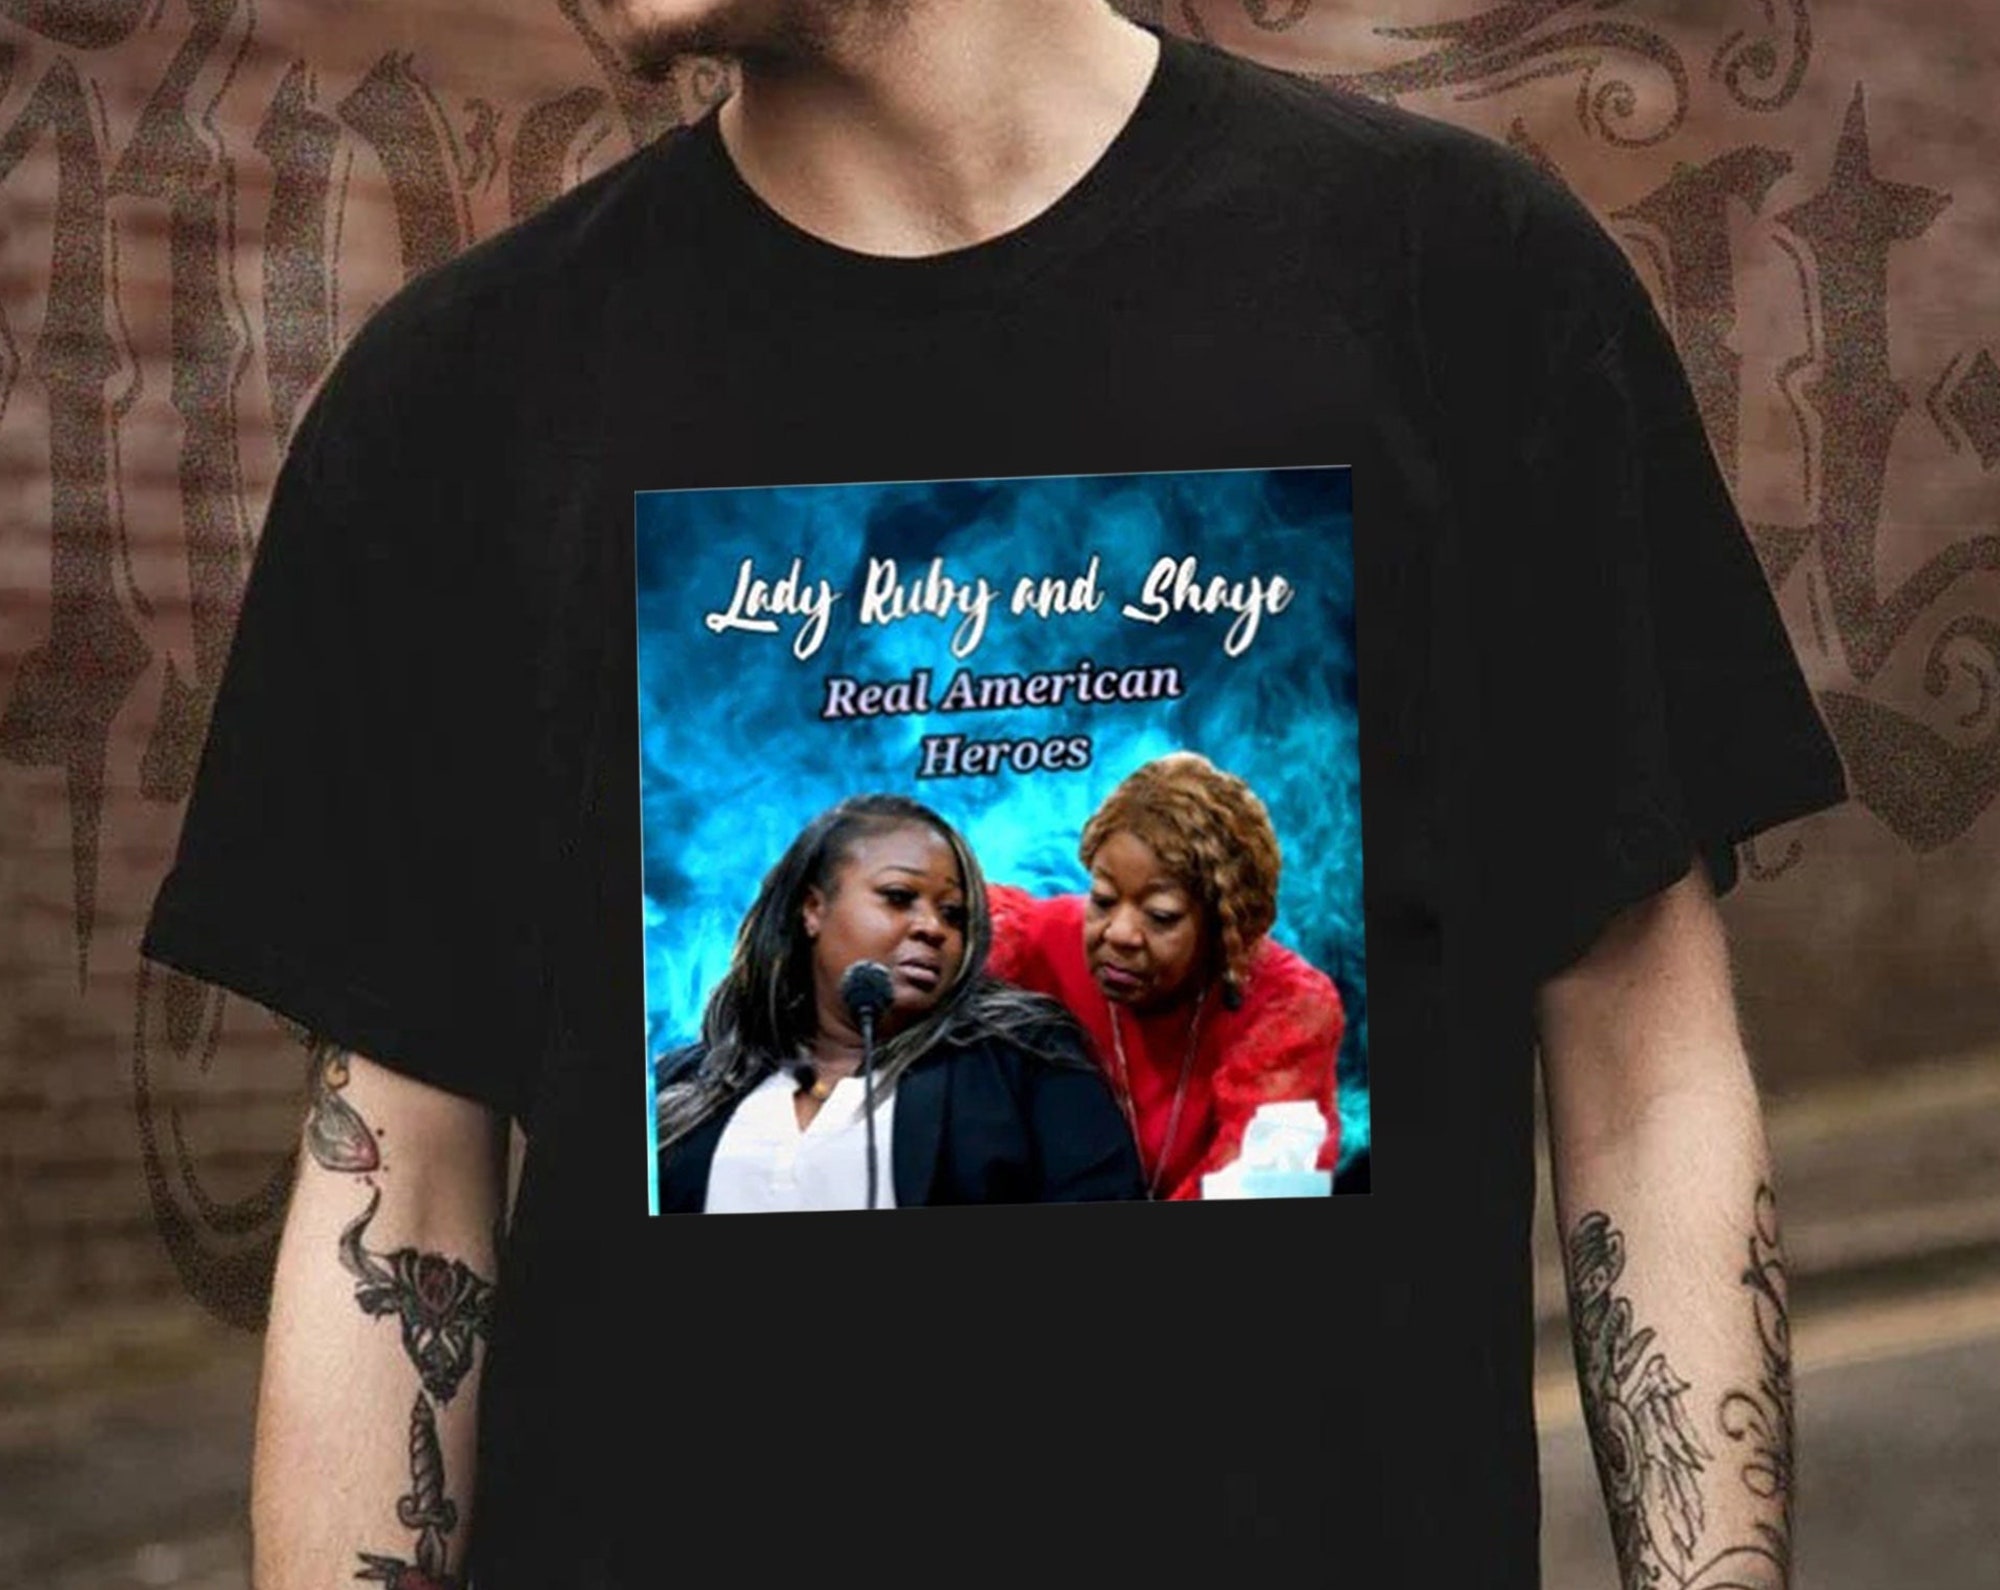 Discover Lady Ruby Shirt, Lady Ruby and Shaye Real American Heroes, January 6 Justice For Lady Ruby and Shaye